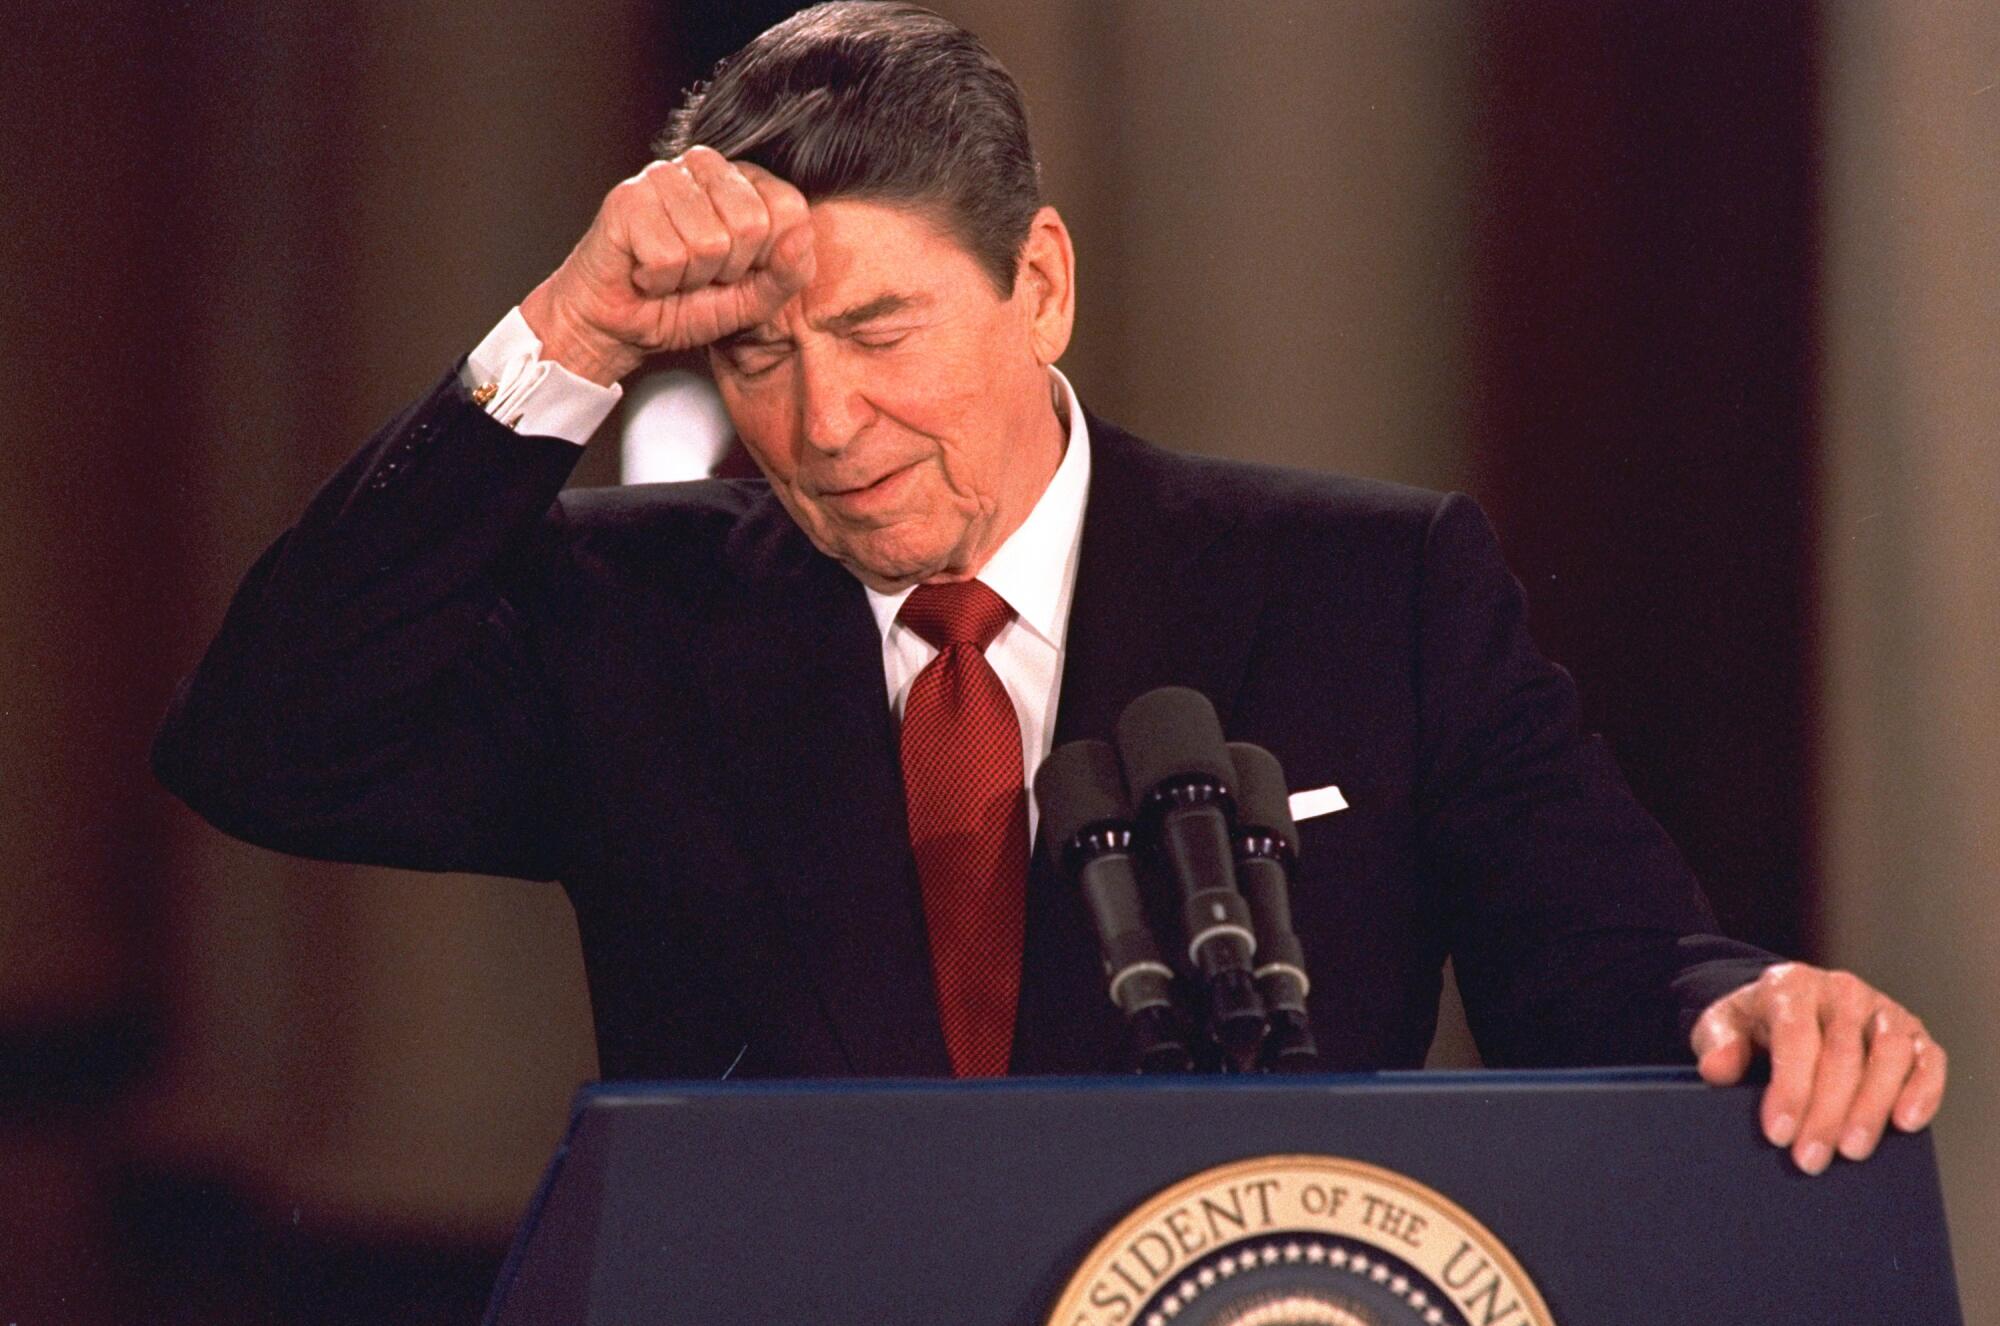 President Reagan, eyes closed, holds his right fist to his forehead, his other hand on a lectern with the presidential seal